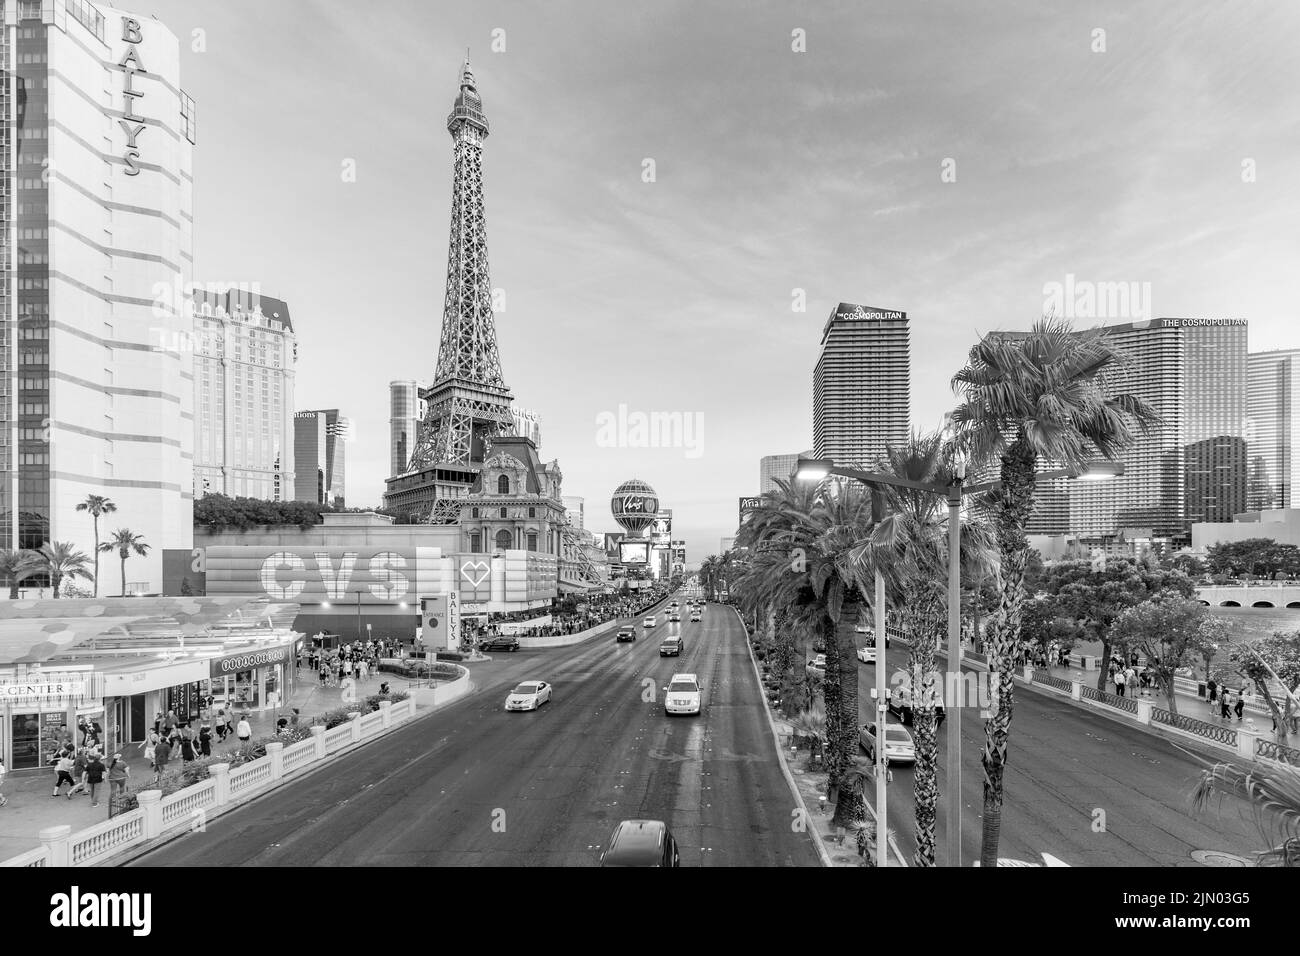 Hotels las vegas strip Black and White Stock Photos & Images Alamy